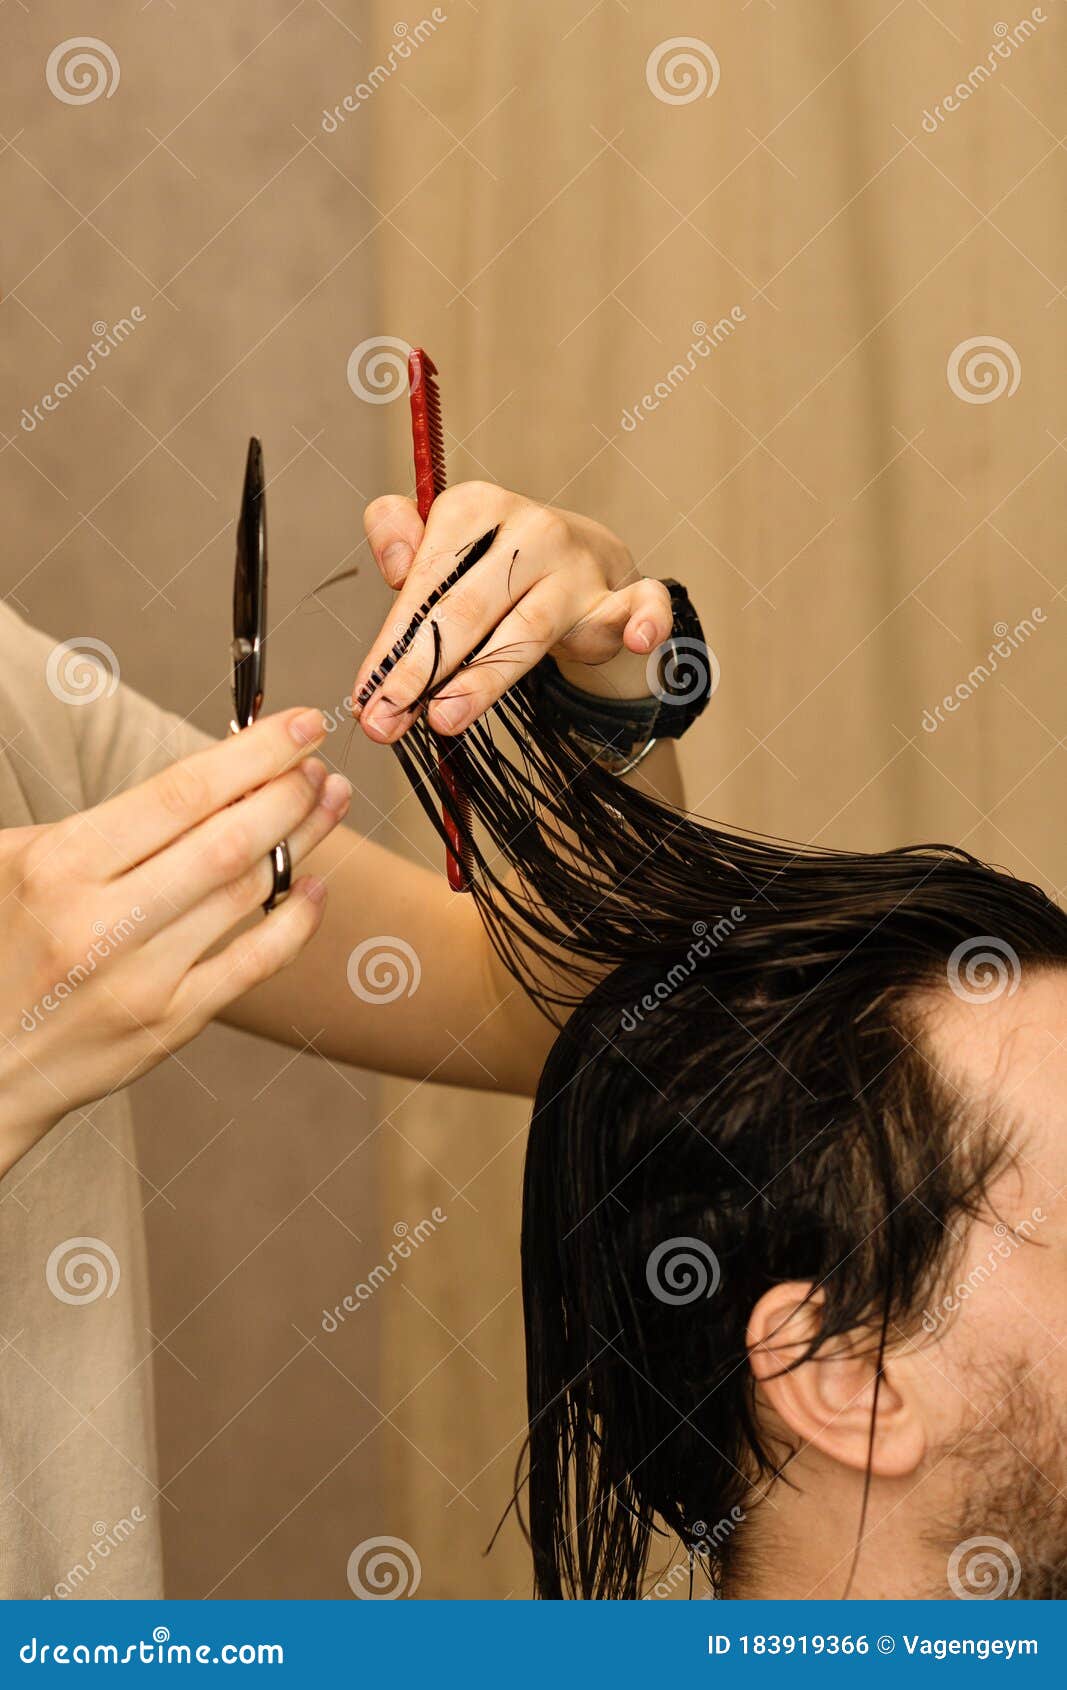 Photos Can You Trim Pubic Hair With Scissors with Best Haircut